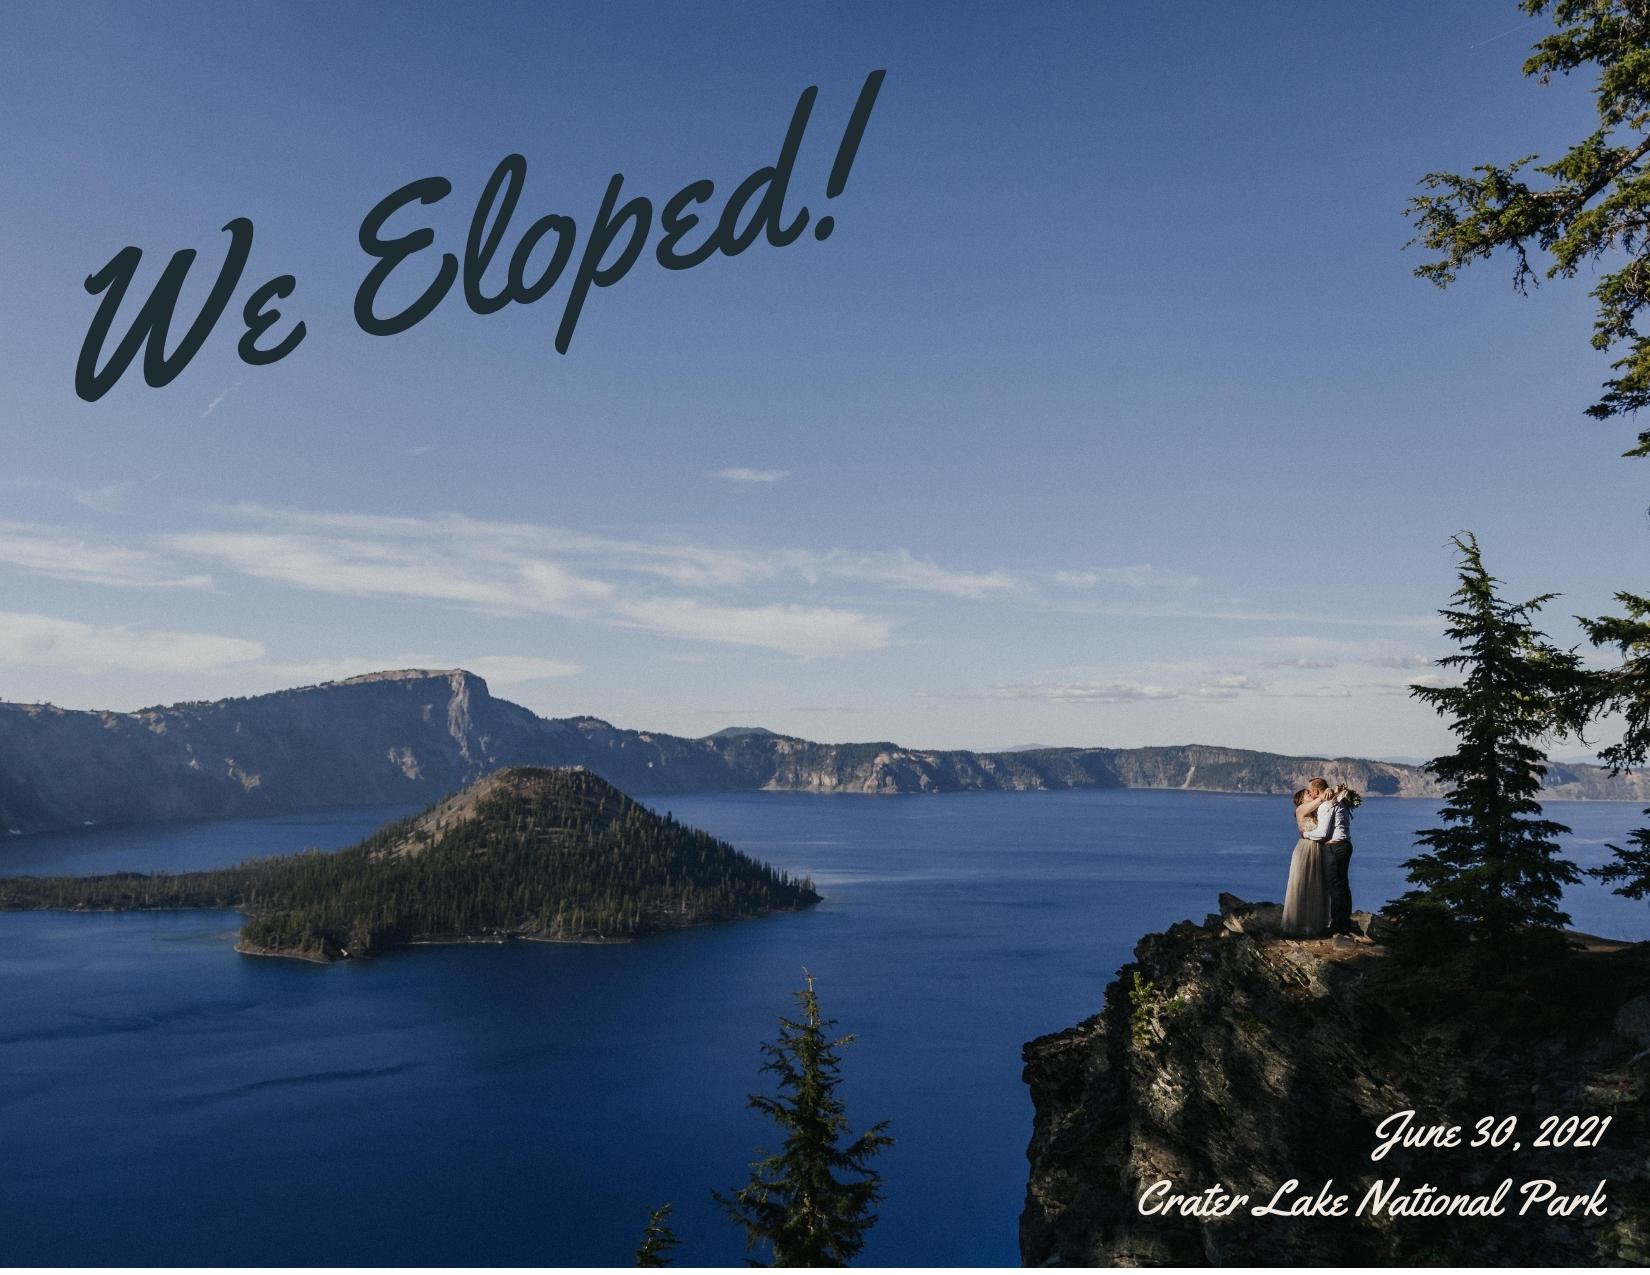 An example of a "We Eloped" postcard of how to announce your elopement to family and friends.